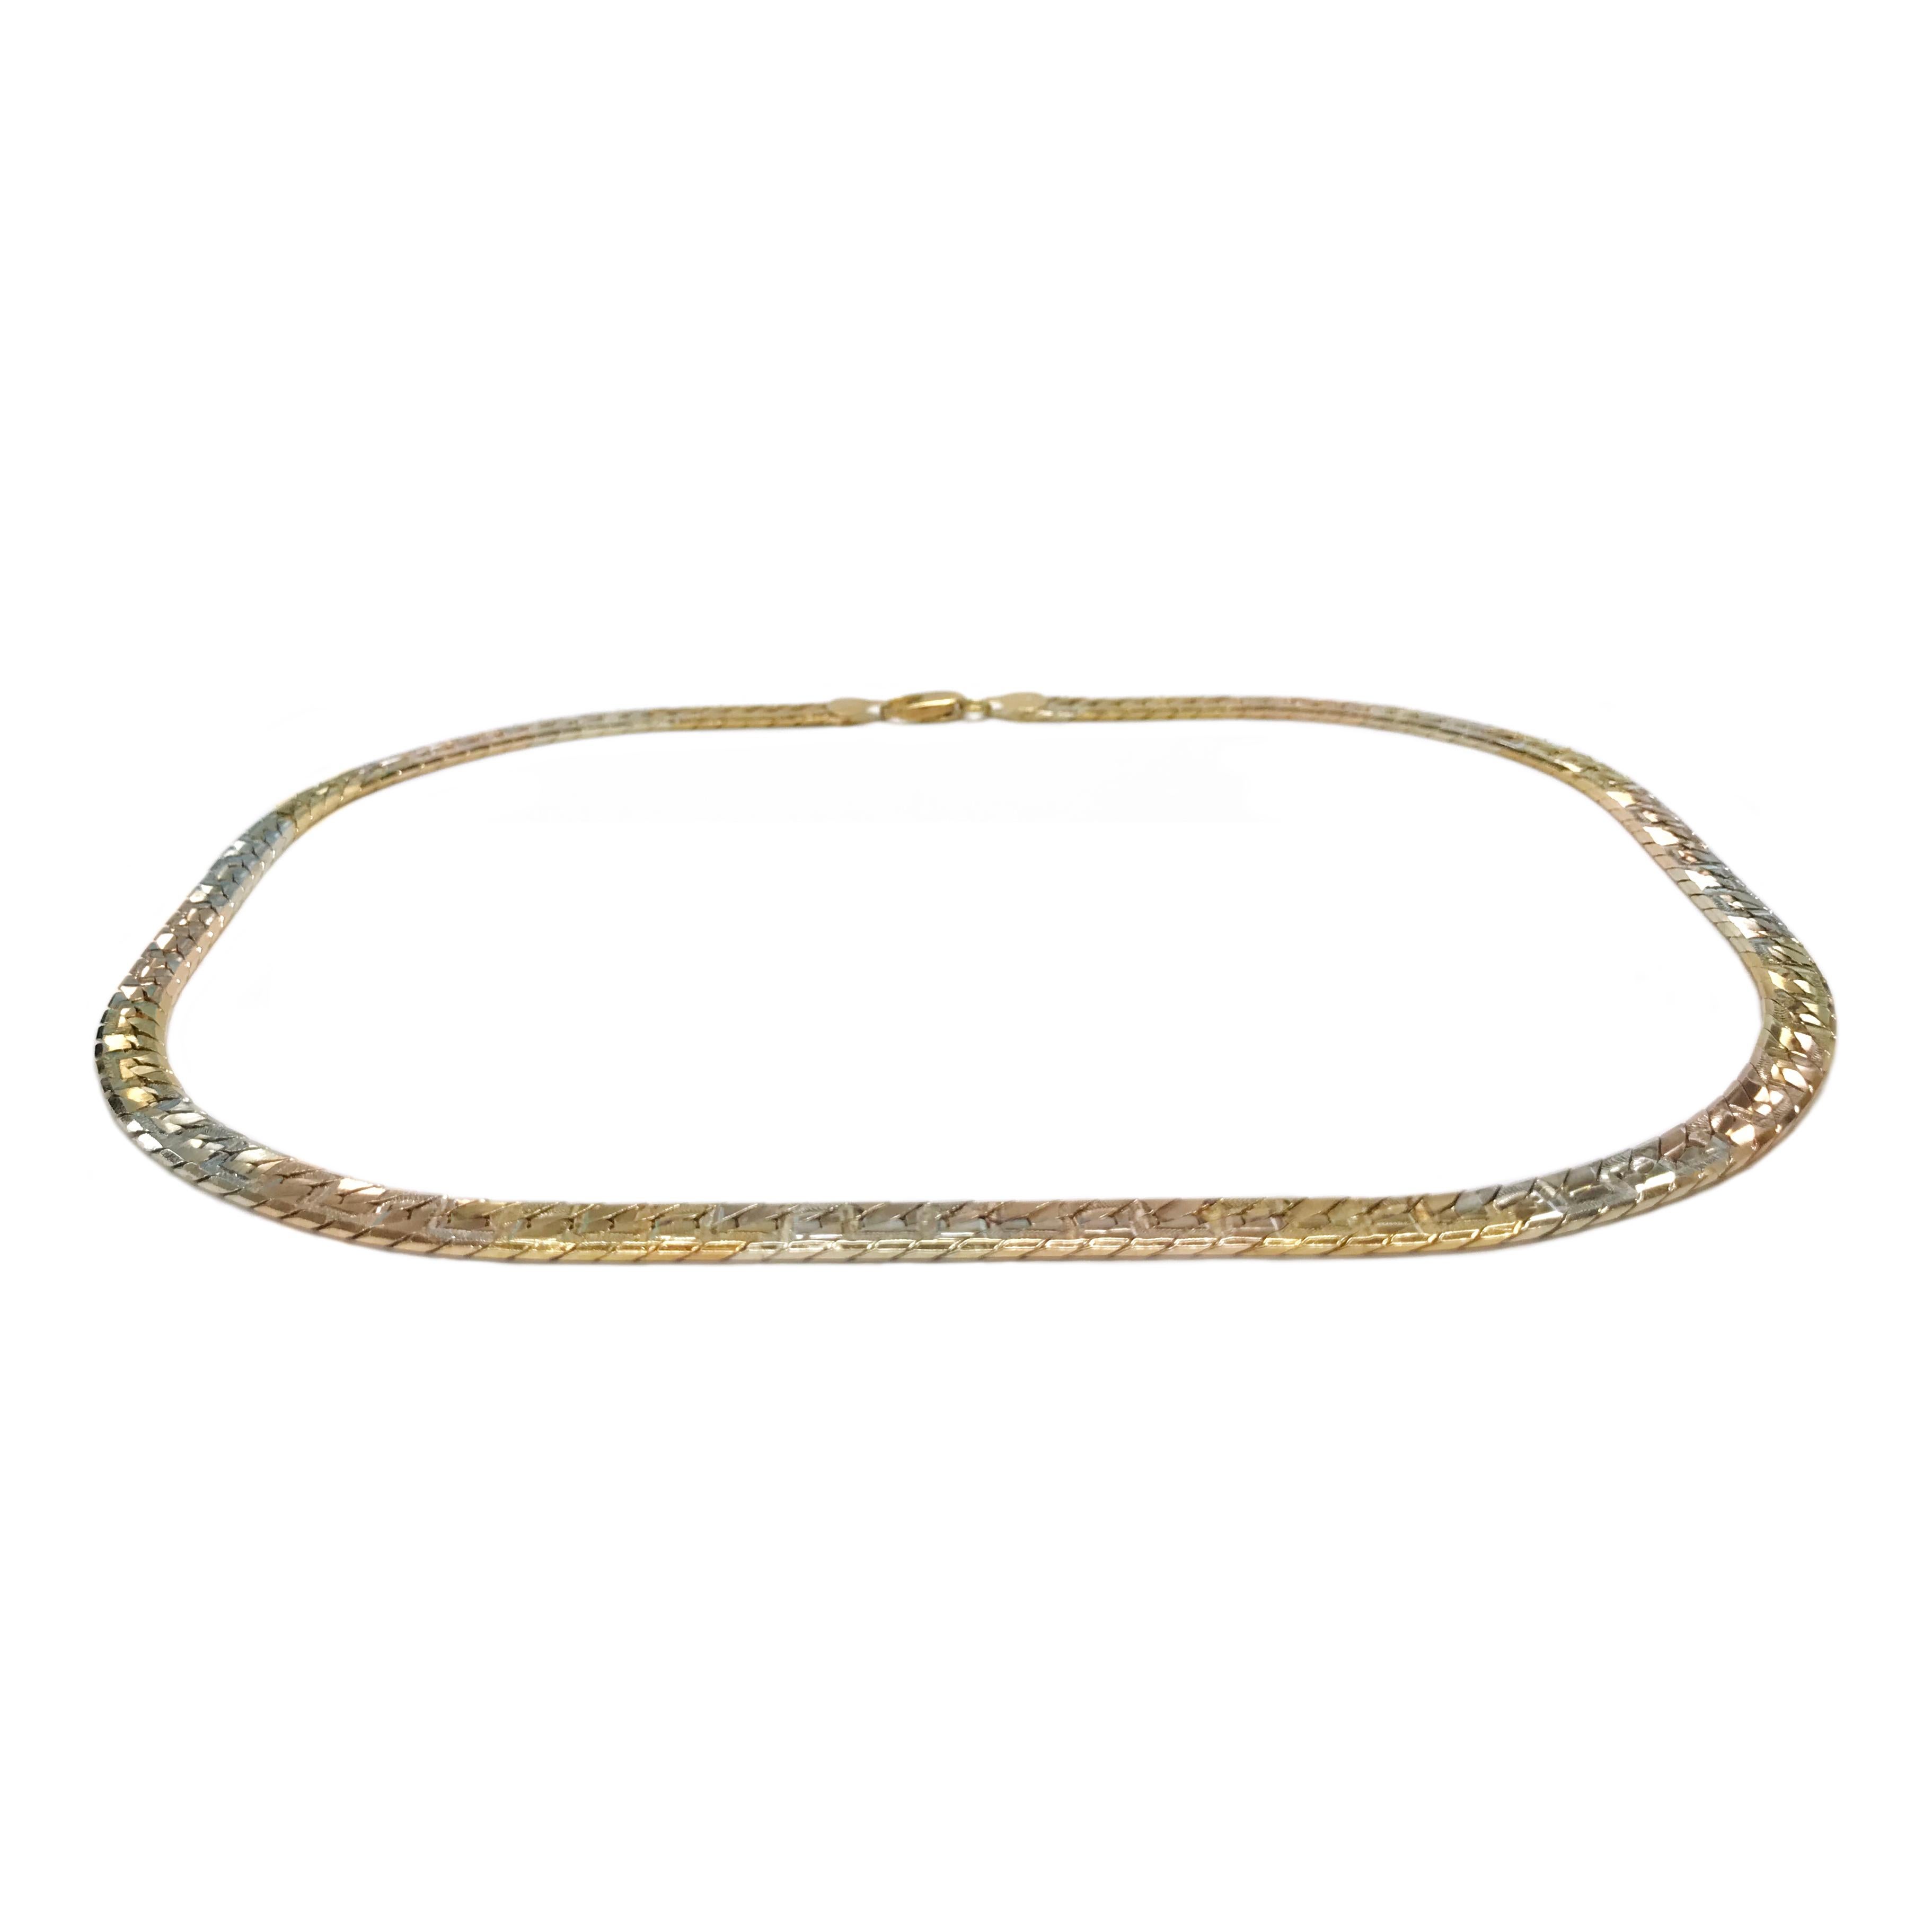 18 Karat Tri-Colored Gold Italian Chain Necklace. This bold chain alternates gold colors between yellow, rose, and white gold throughout the entire length of the necklace. The width of the necklace is 0.25